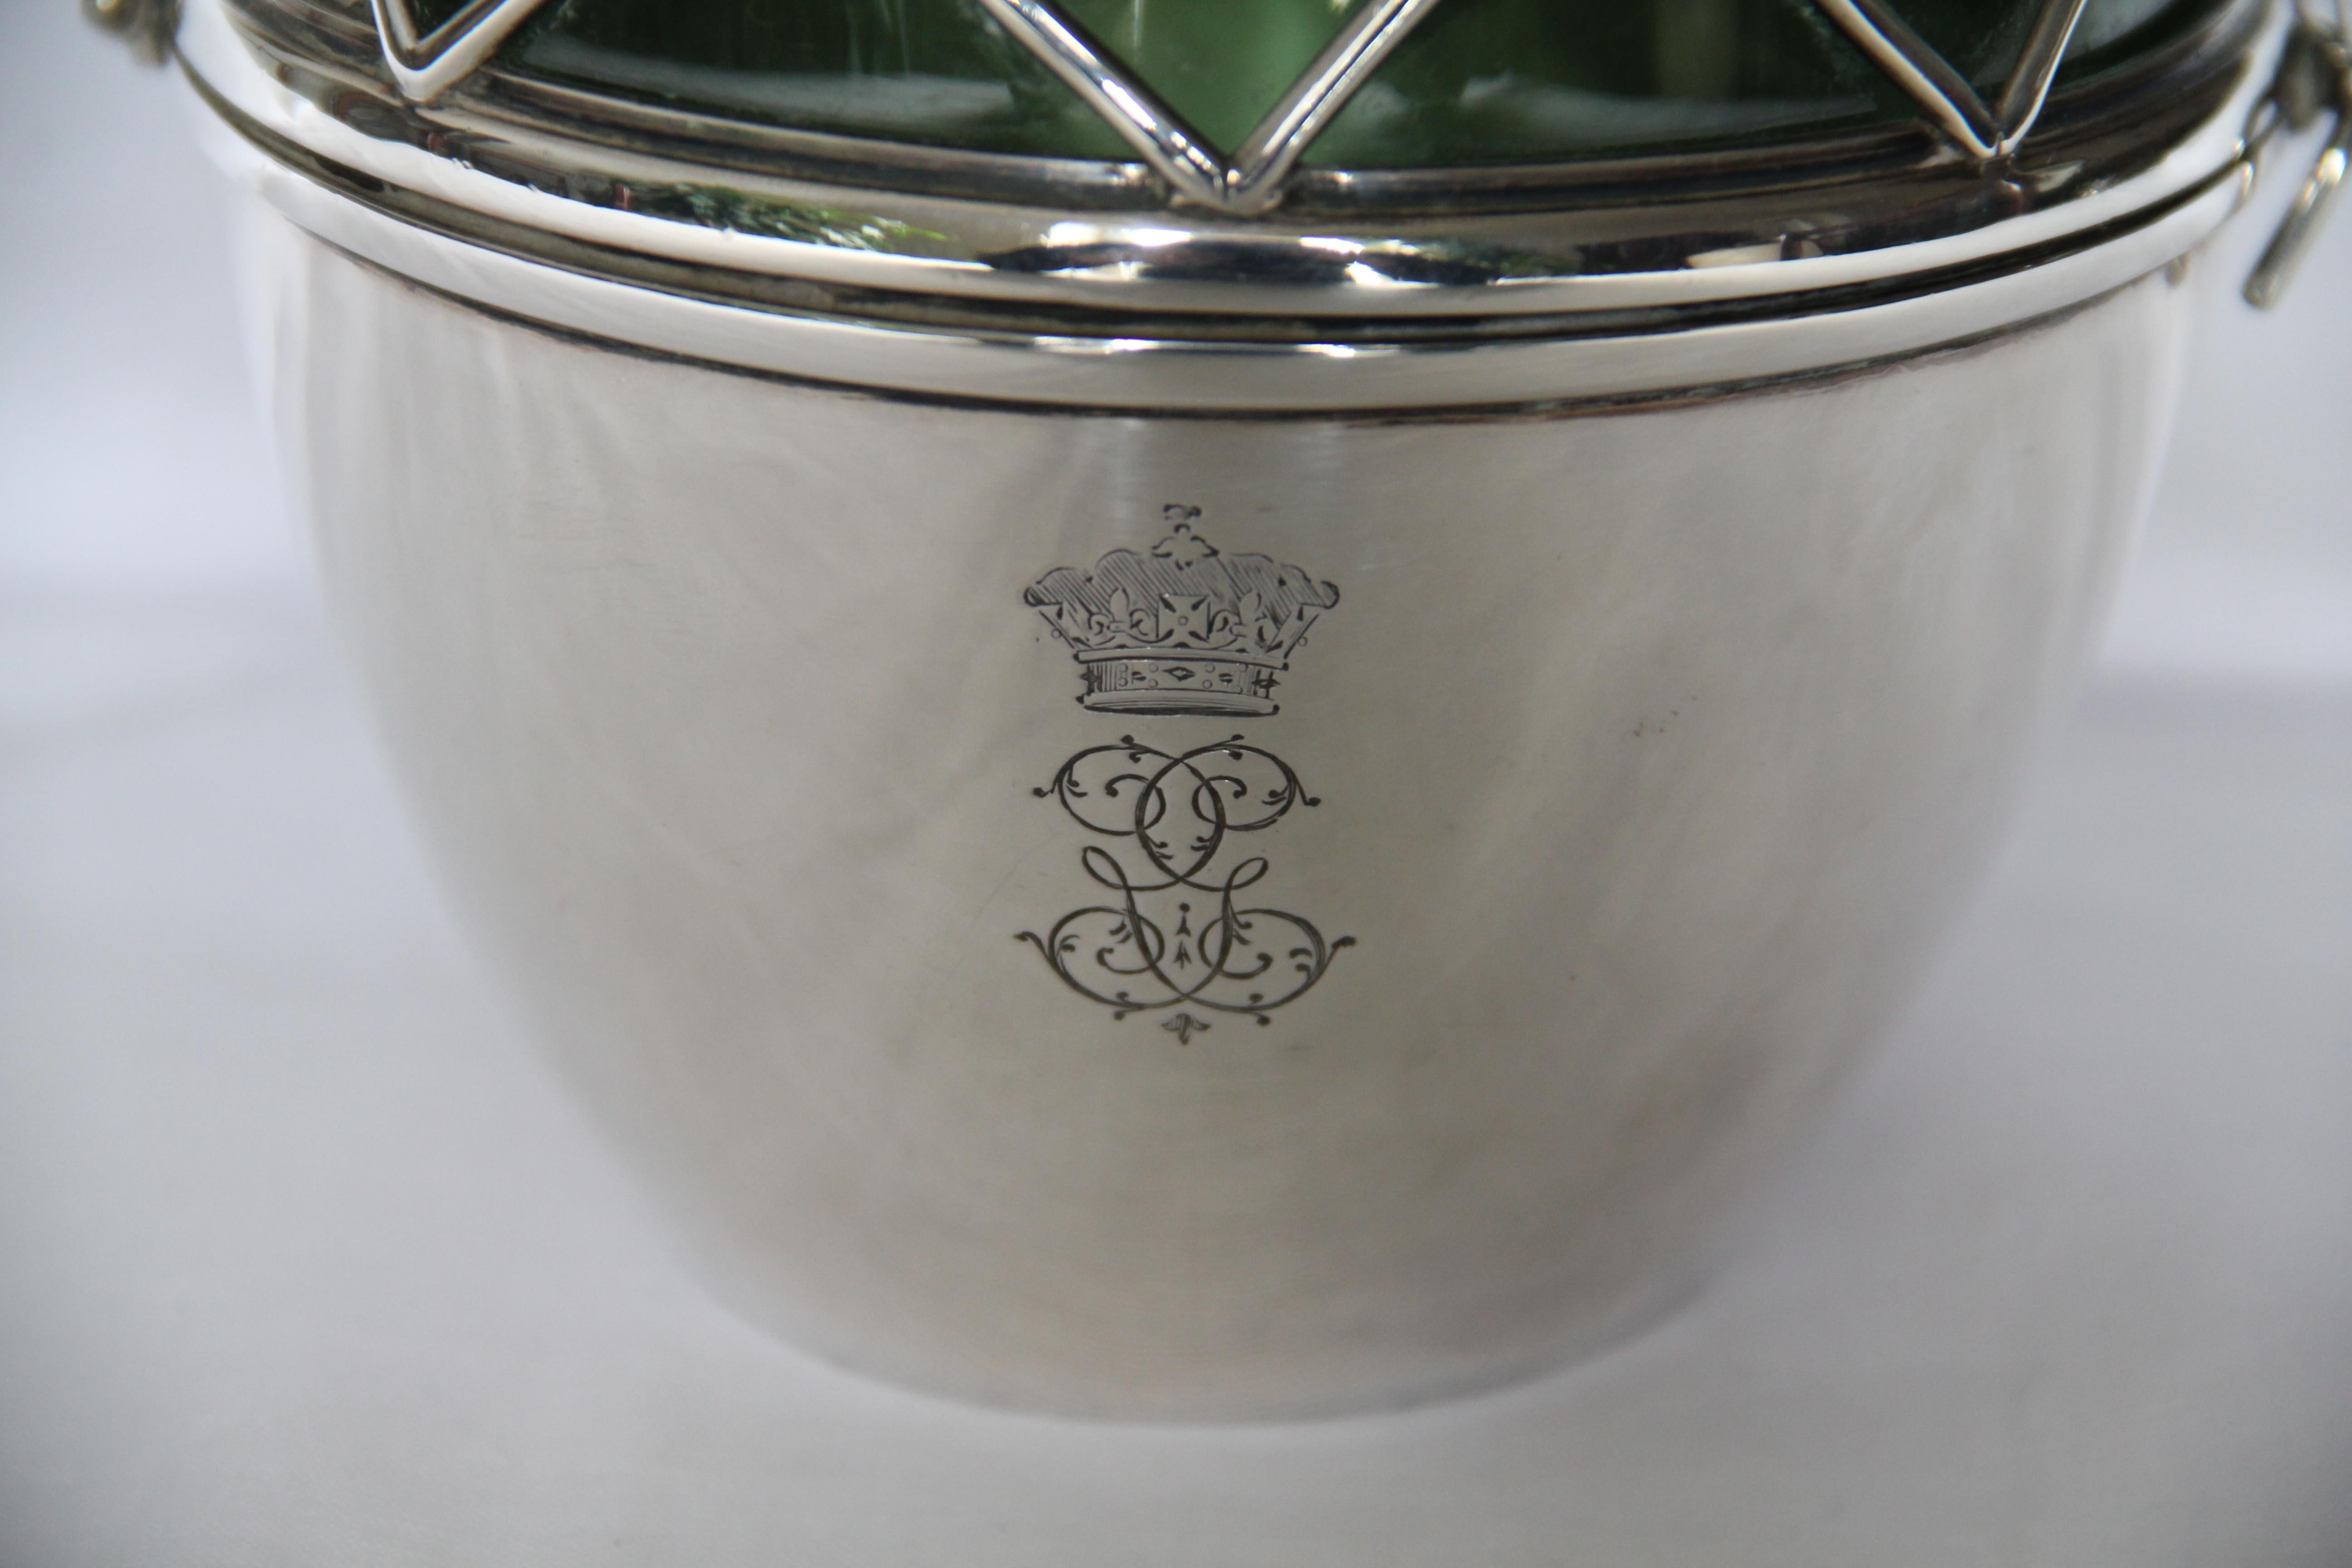 British 2 Silver Carafes by Aldwincle & Slater 1894 later given Royal Provenance c. 1901 For Sale